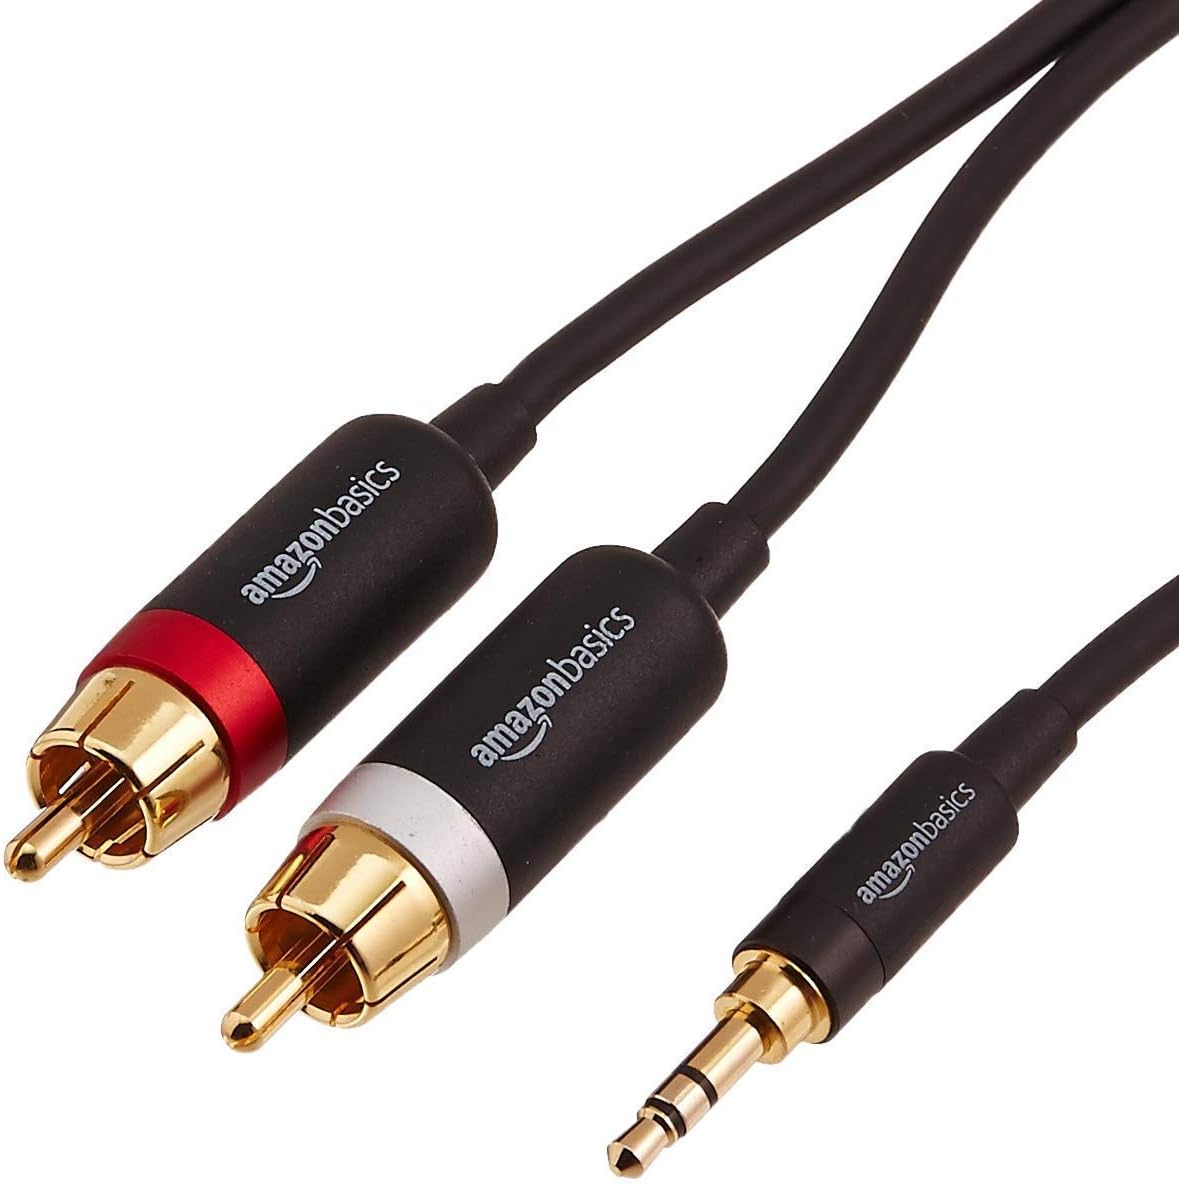 Amazon Basics 3.5mm Aux to 2 RCA Adapter Audio Cable [...]